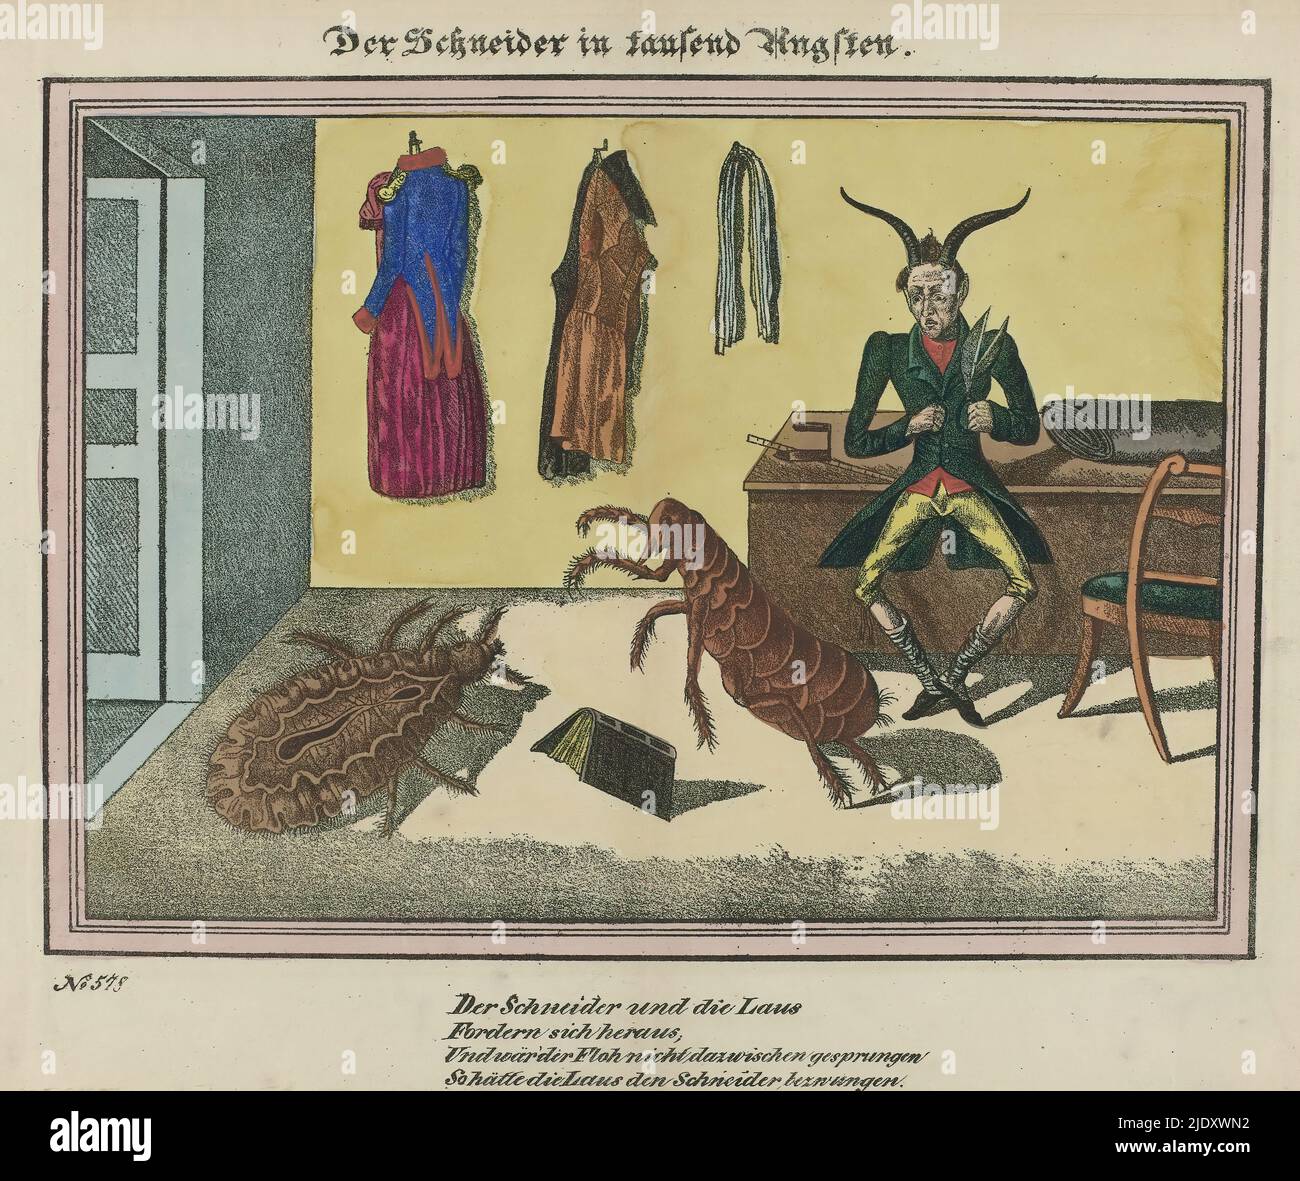 https://c8.alamy.com/comp/2JDXWN2/der-schneider-in-tausend-angsten-1830-1840-no-578-der-schneider-und-title-on-object-caricature-of-a-tailor-in-his-studio-he-is-standing-at-a-work-table-and-has-a-large-pair-of-scissors-in-his-hands-in-front-of-him-are-two-enormous-fleas-according-to-the-title-the-tailor-has-to-face-a-thousand-fears-print-maker-anonymous-c-1830-c-1840-paper-height-317-mm-width-387-mm-2JDXWN2.jpg